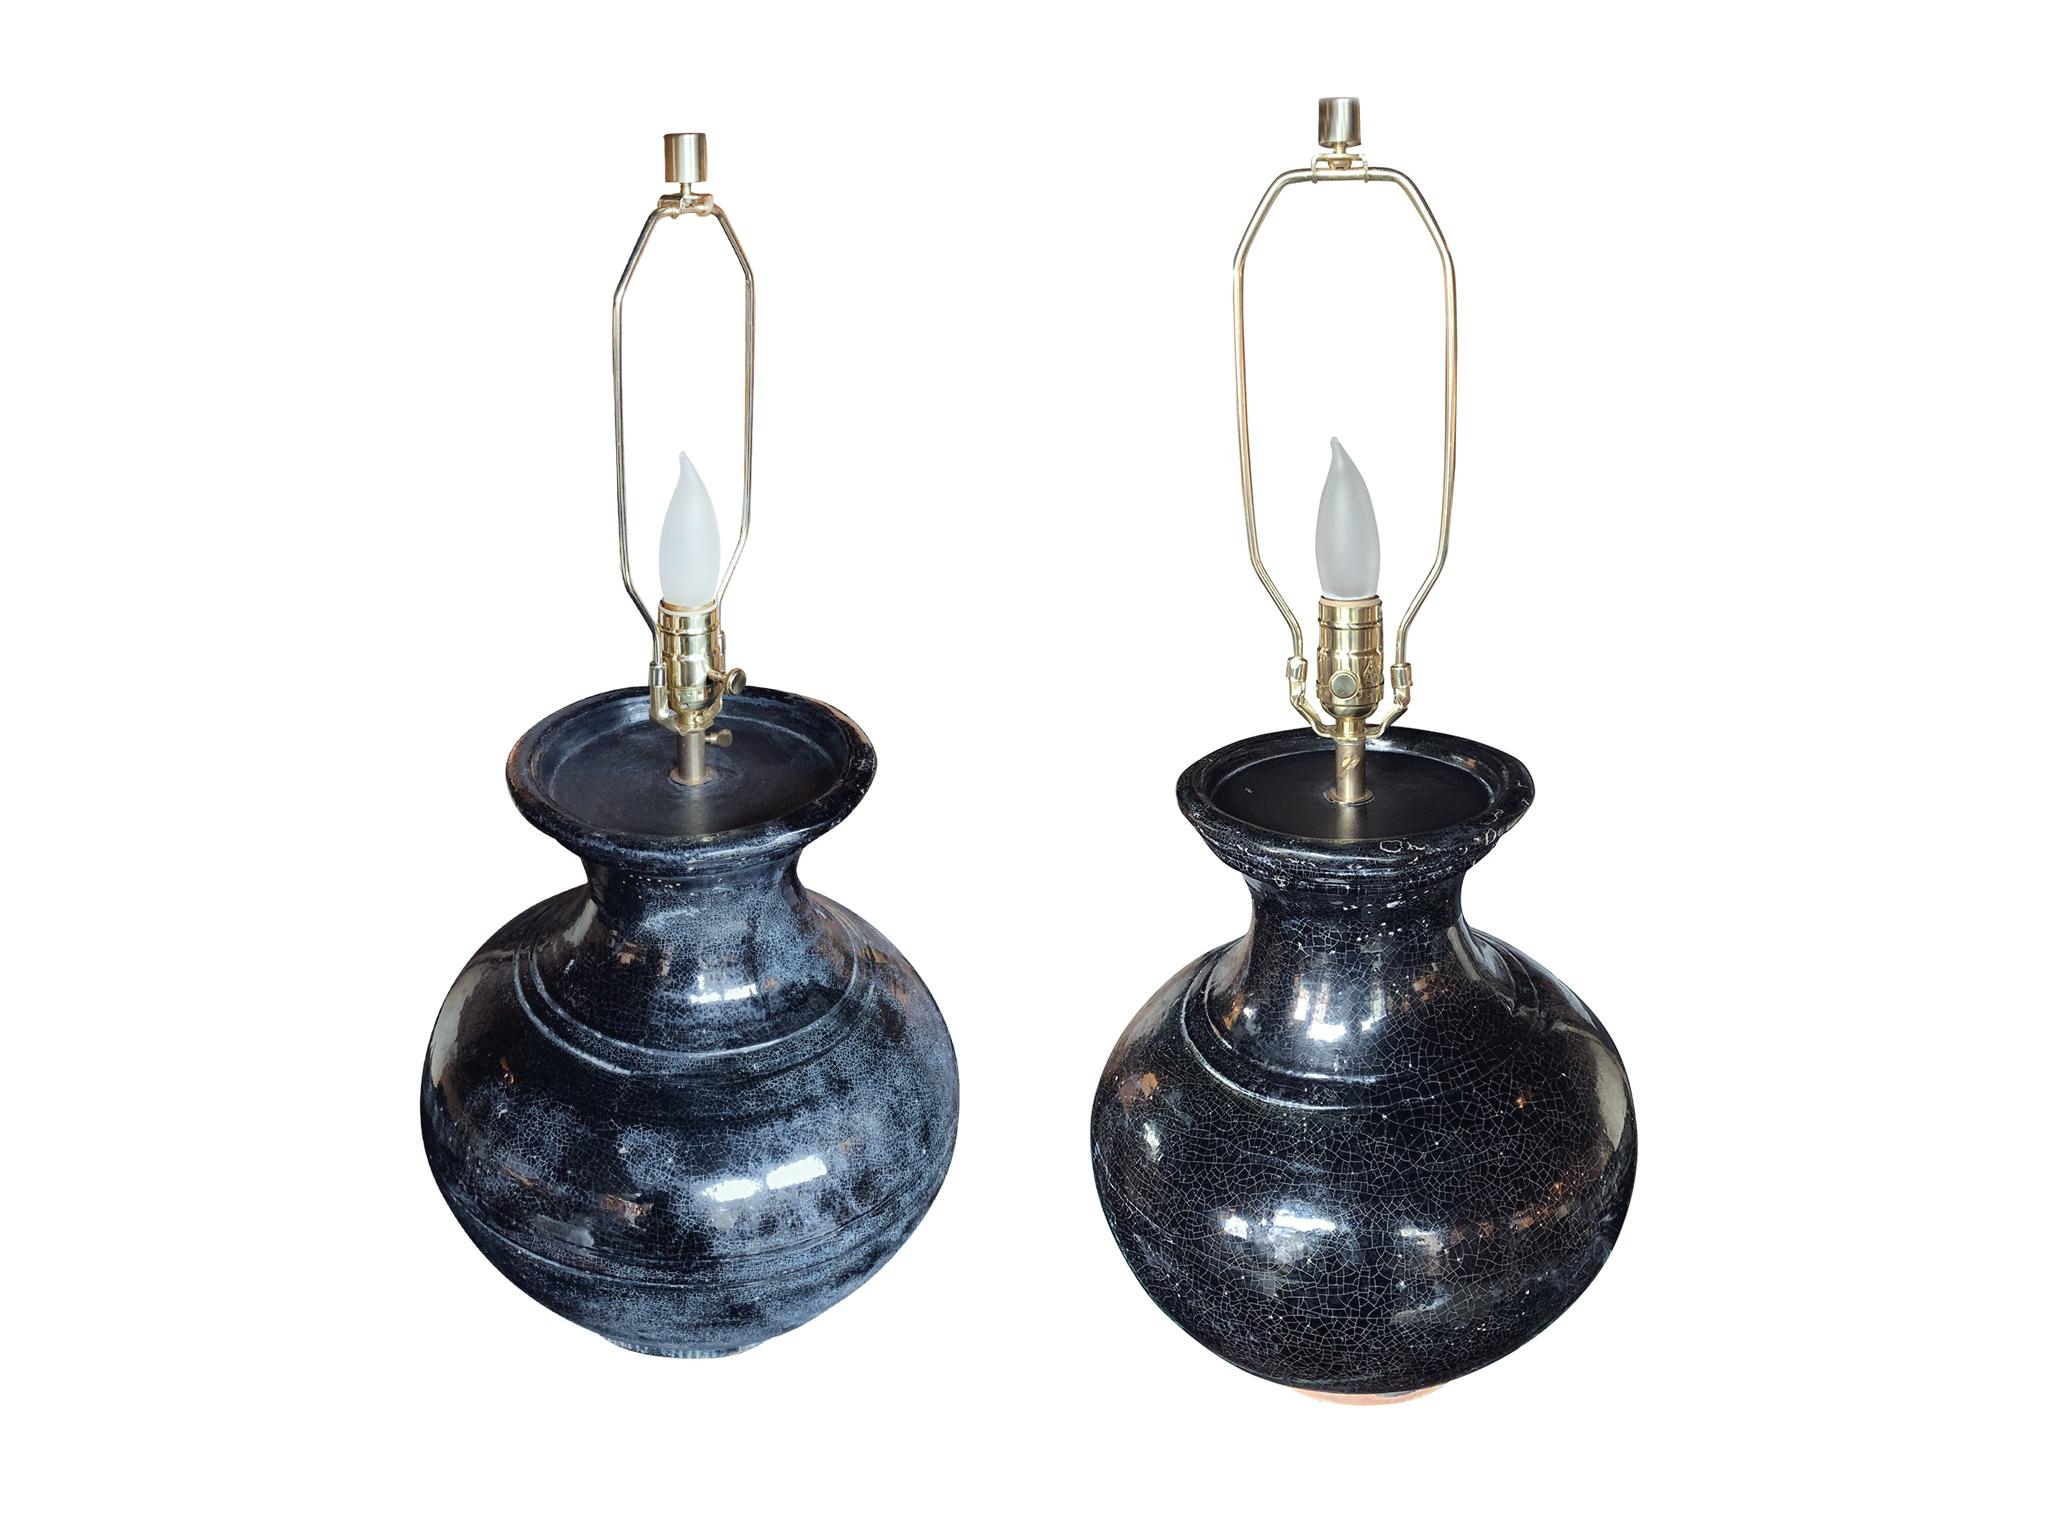 An exquisite pair of midcentury vase lamps. They are comprised of ceramic bodies with a near-metallic black glaze and craquelure textures. The lamps are newly rewired and refurbished with new brass hardware, which includes the finials, harps, and